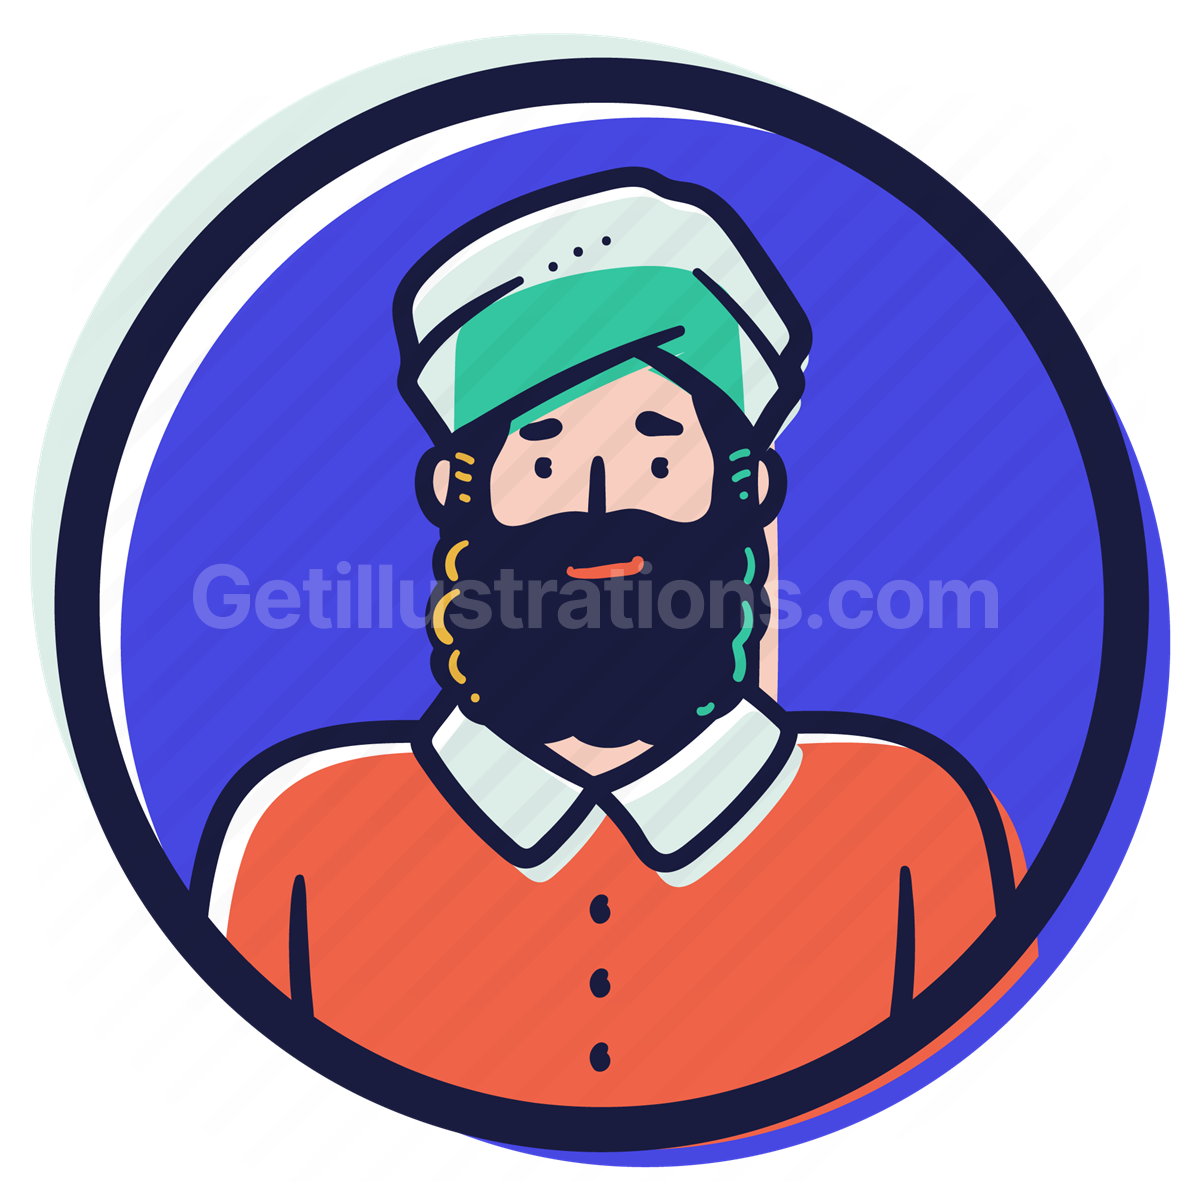 Avatars and Characters illustration